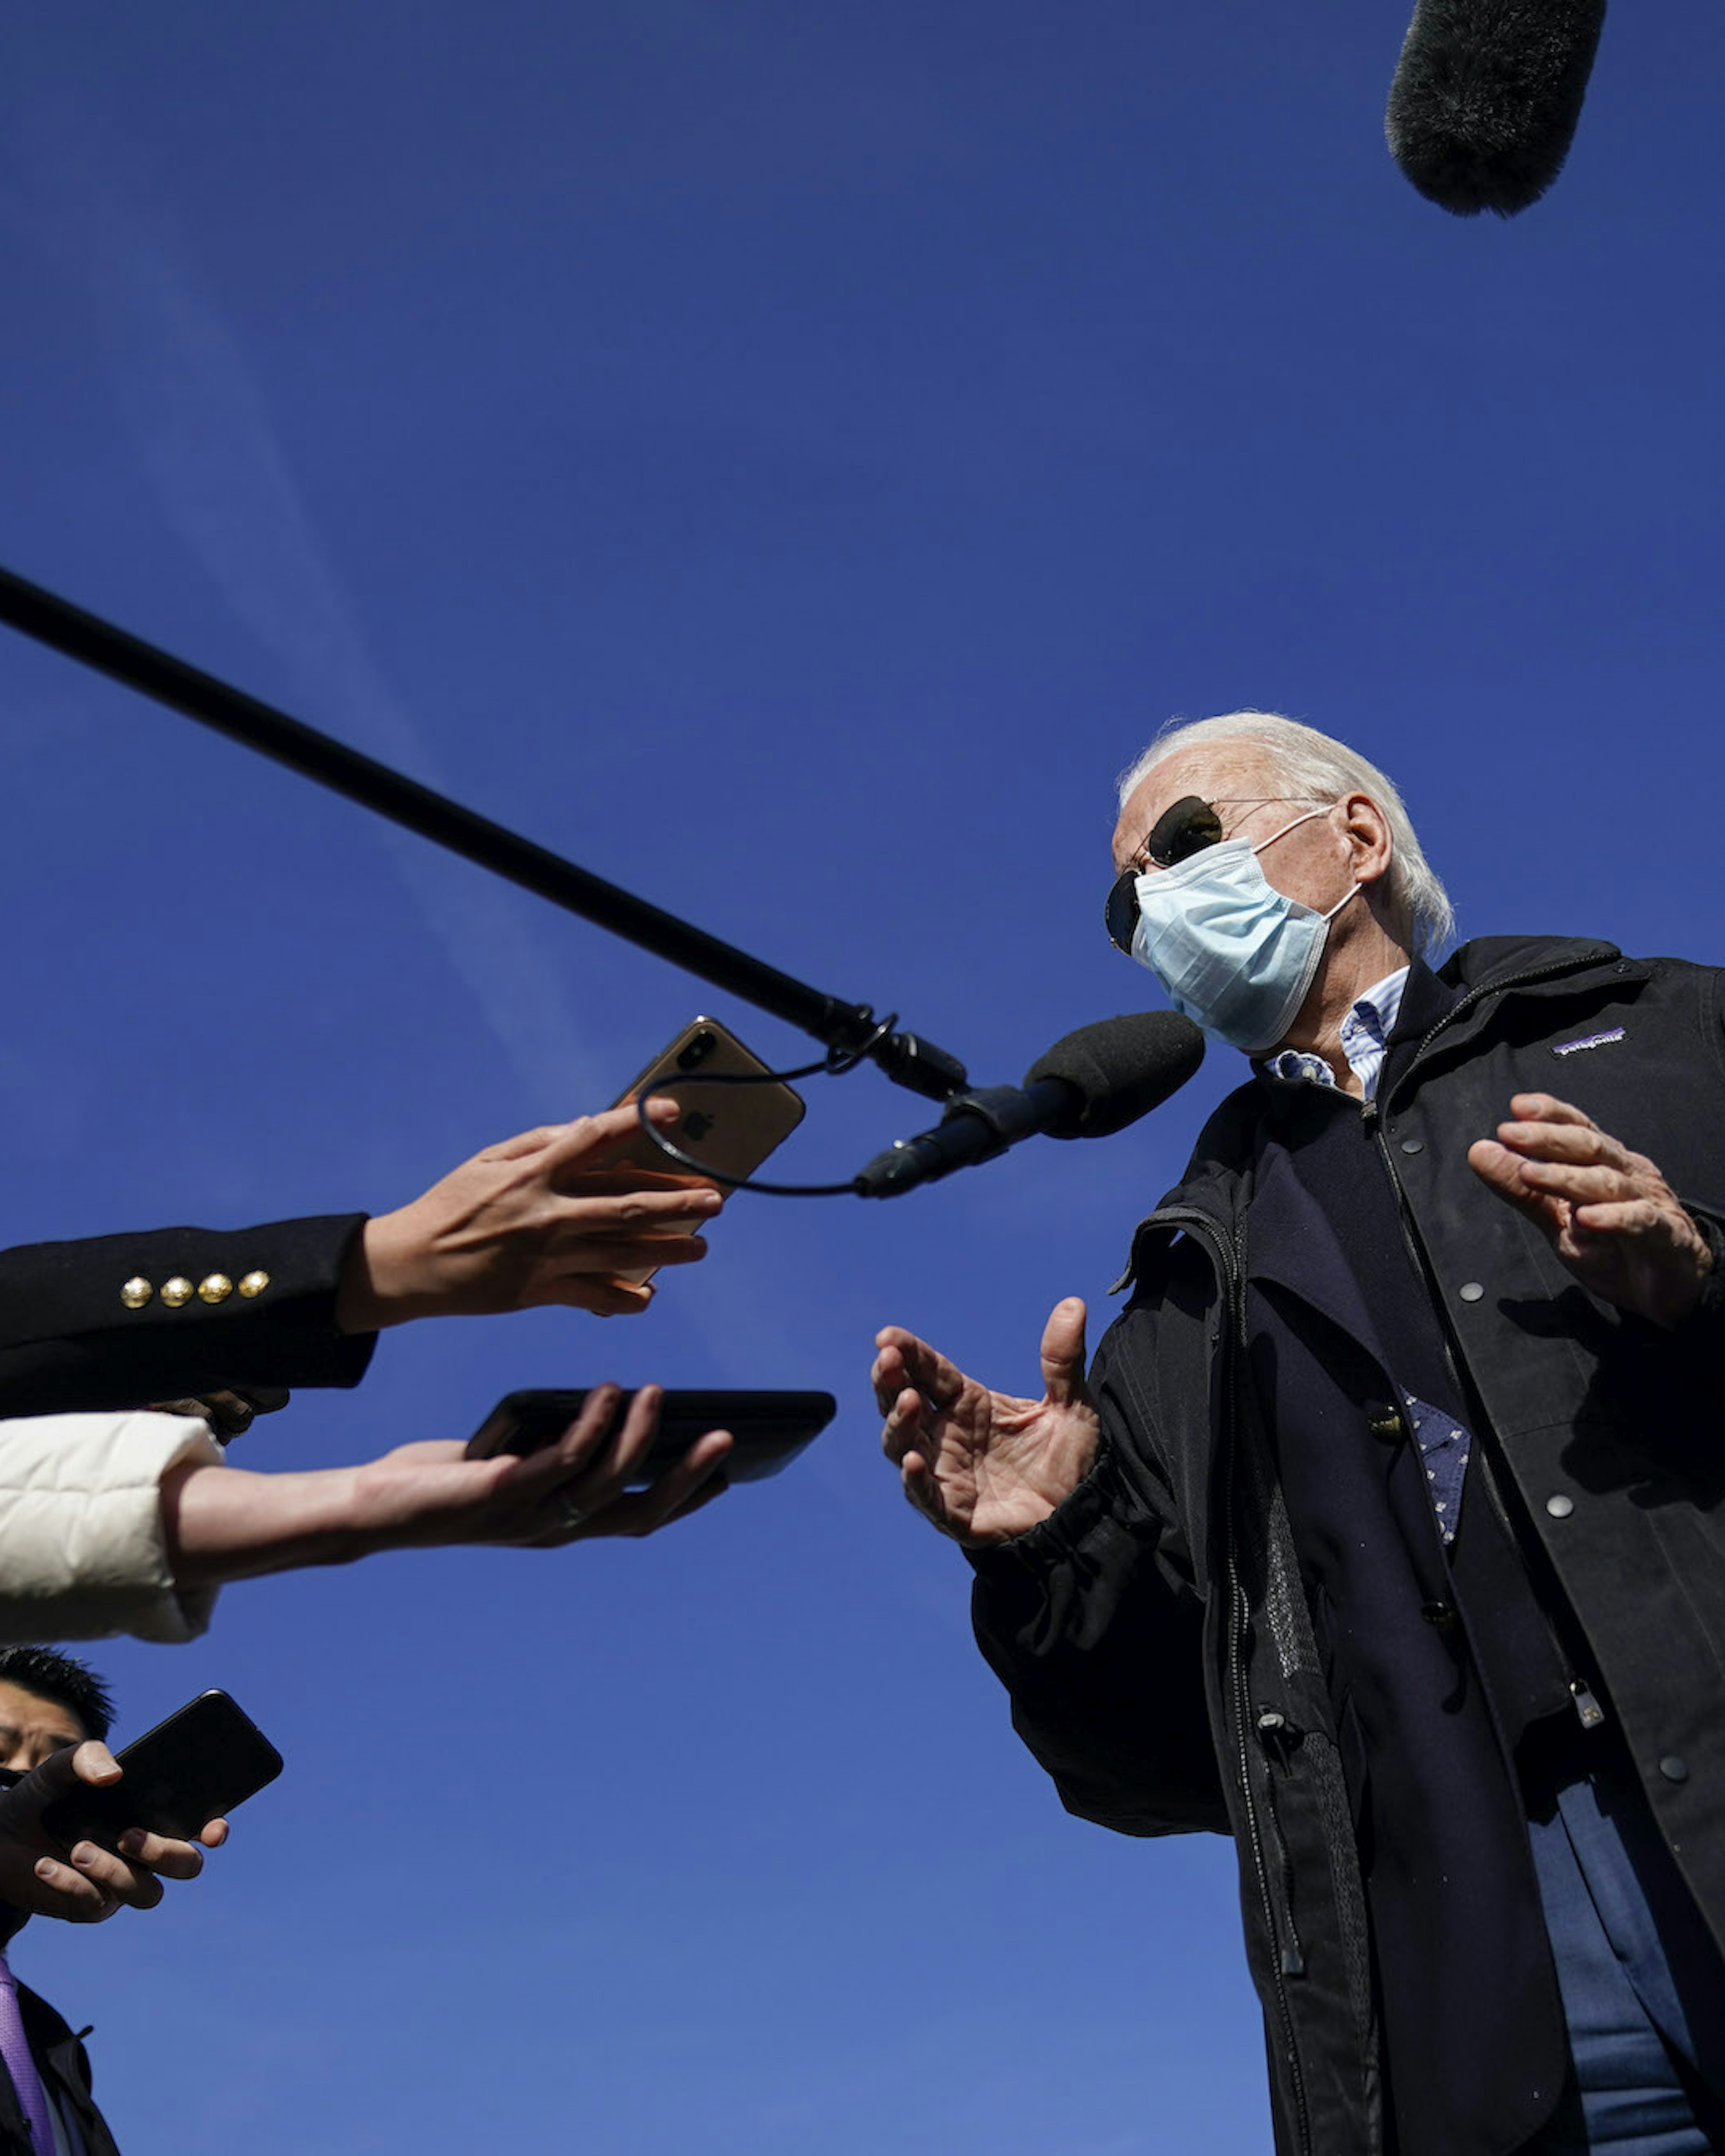 Joe Biden speaks to reporters before boarding his plane at New Castle Airport on December 15, 2020 in New Castle, Delaware. Biden is traveling to Georgia on Tuesday to campaign for Georgia Senate candidates Jon Ossoff and Raphael Warnock. (Photo by Drew Angerer/Getty Images)